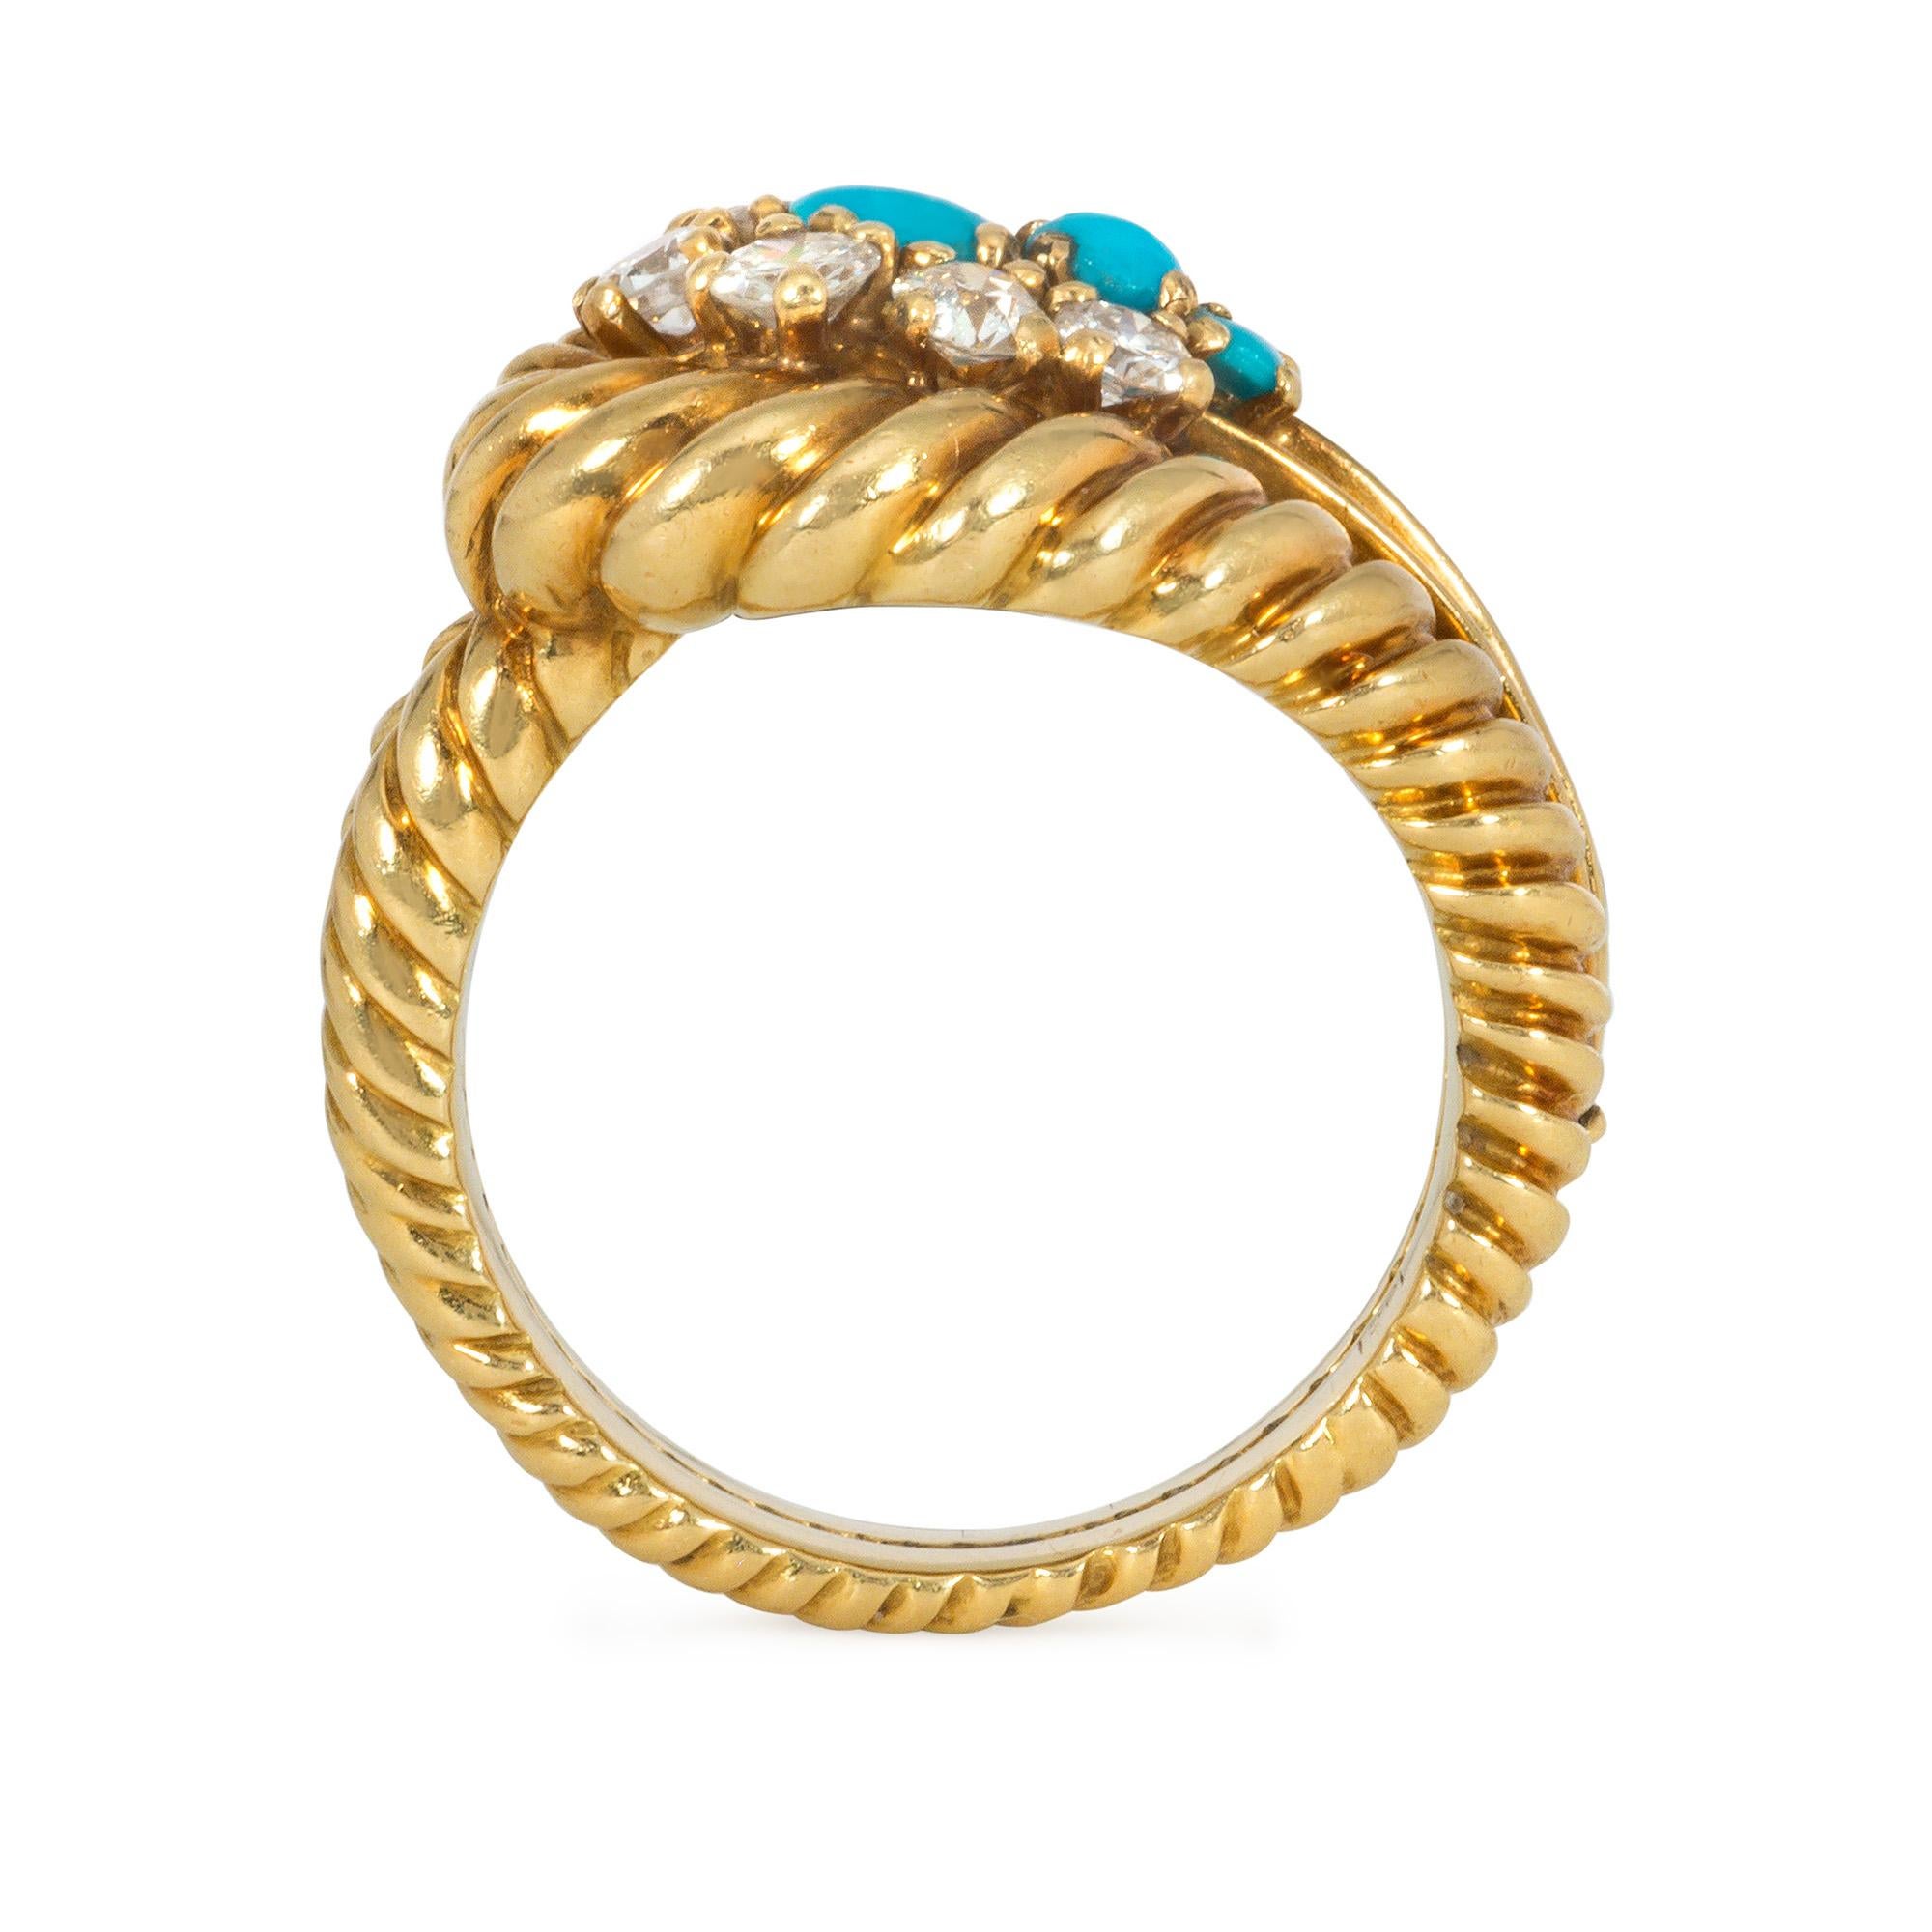 Modern Cartier 1960s Gold, Turquoise, and Diamond Ring of Tapered and Reeded Design For Sale